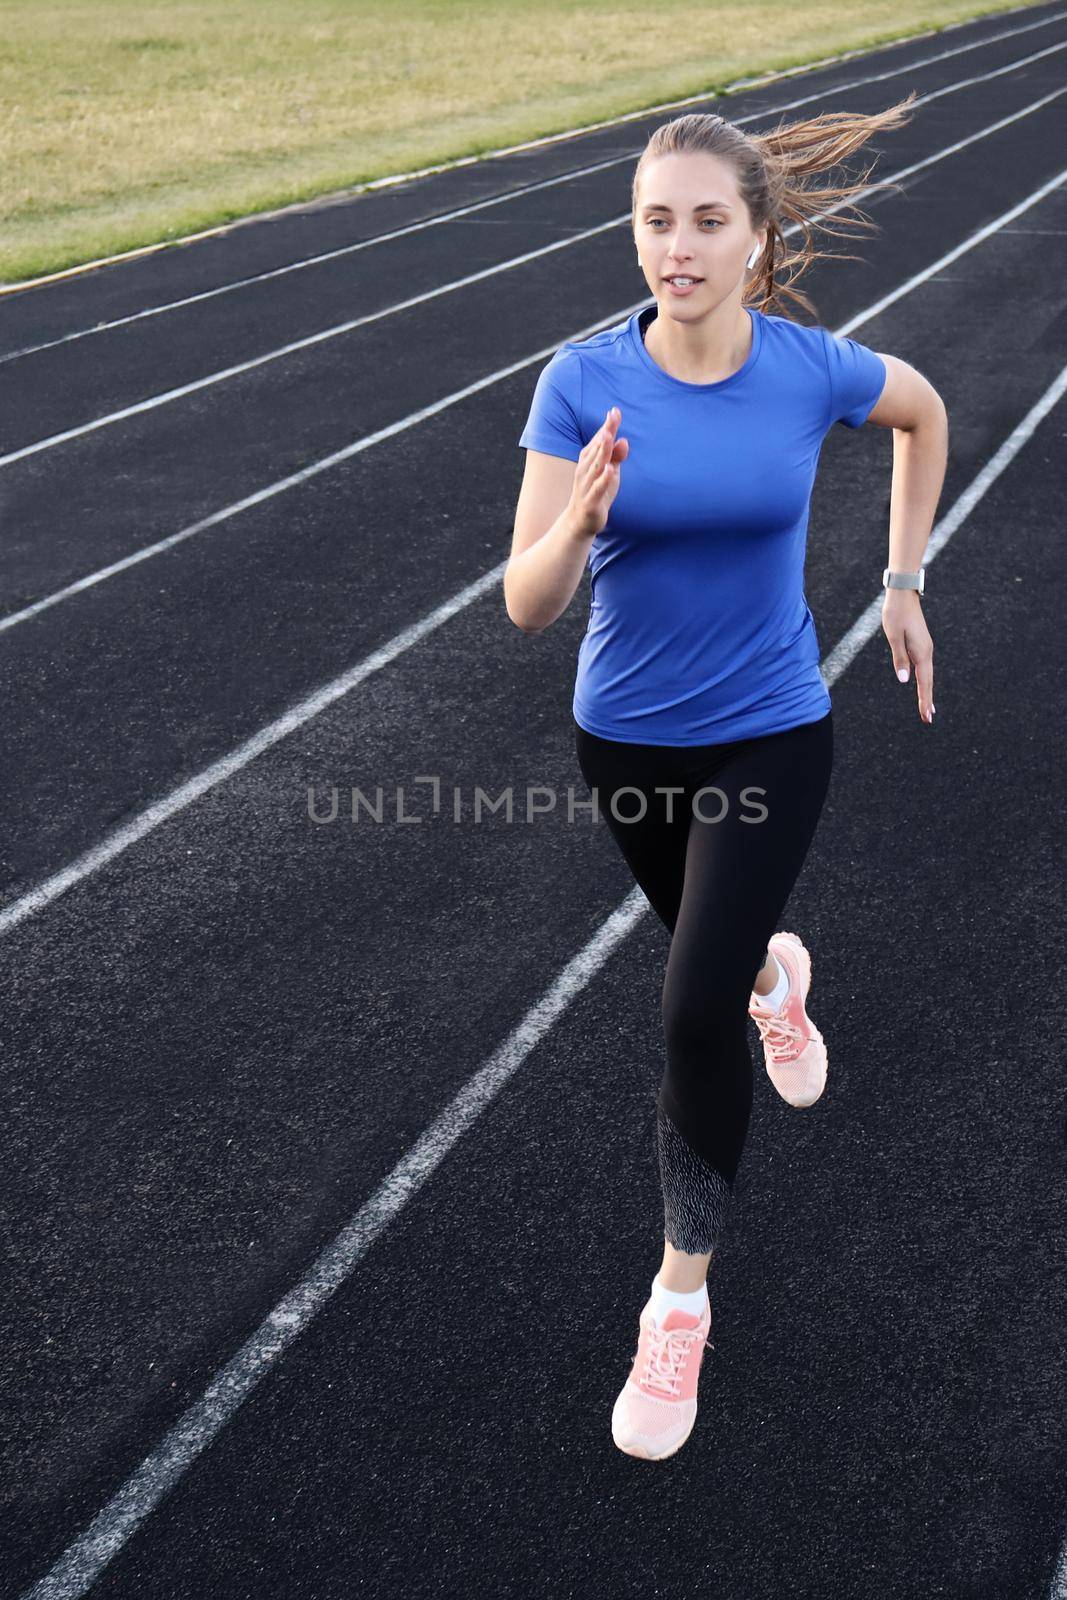 Runner athlete running on athletic track training her cardio in stadium. Jogging at fast pace for competition by tsyhun